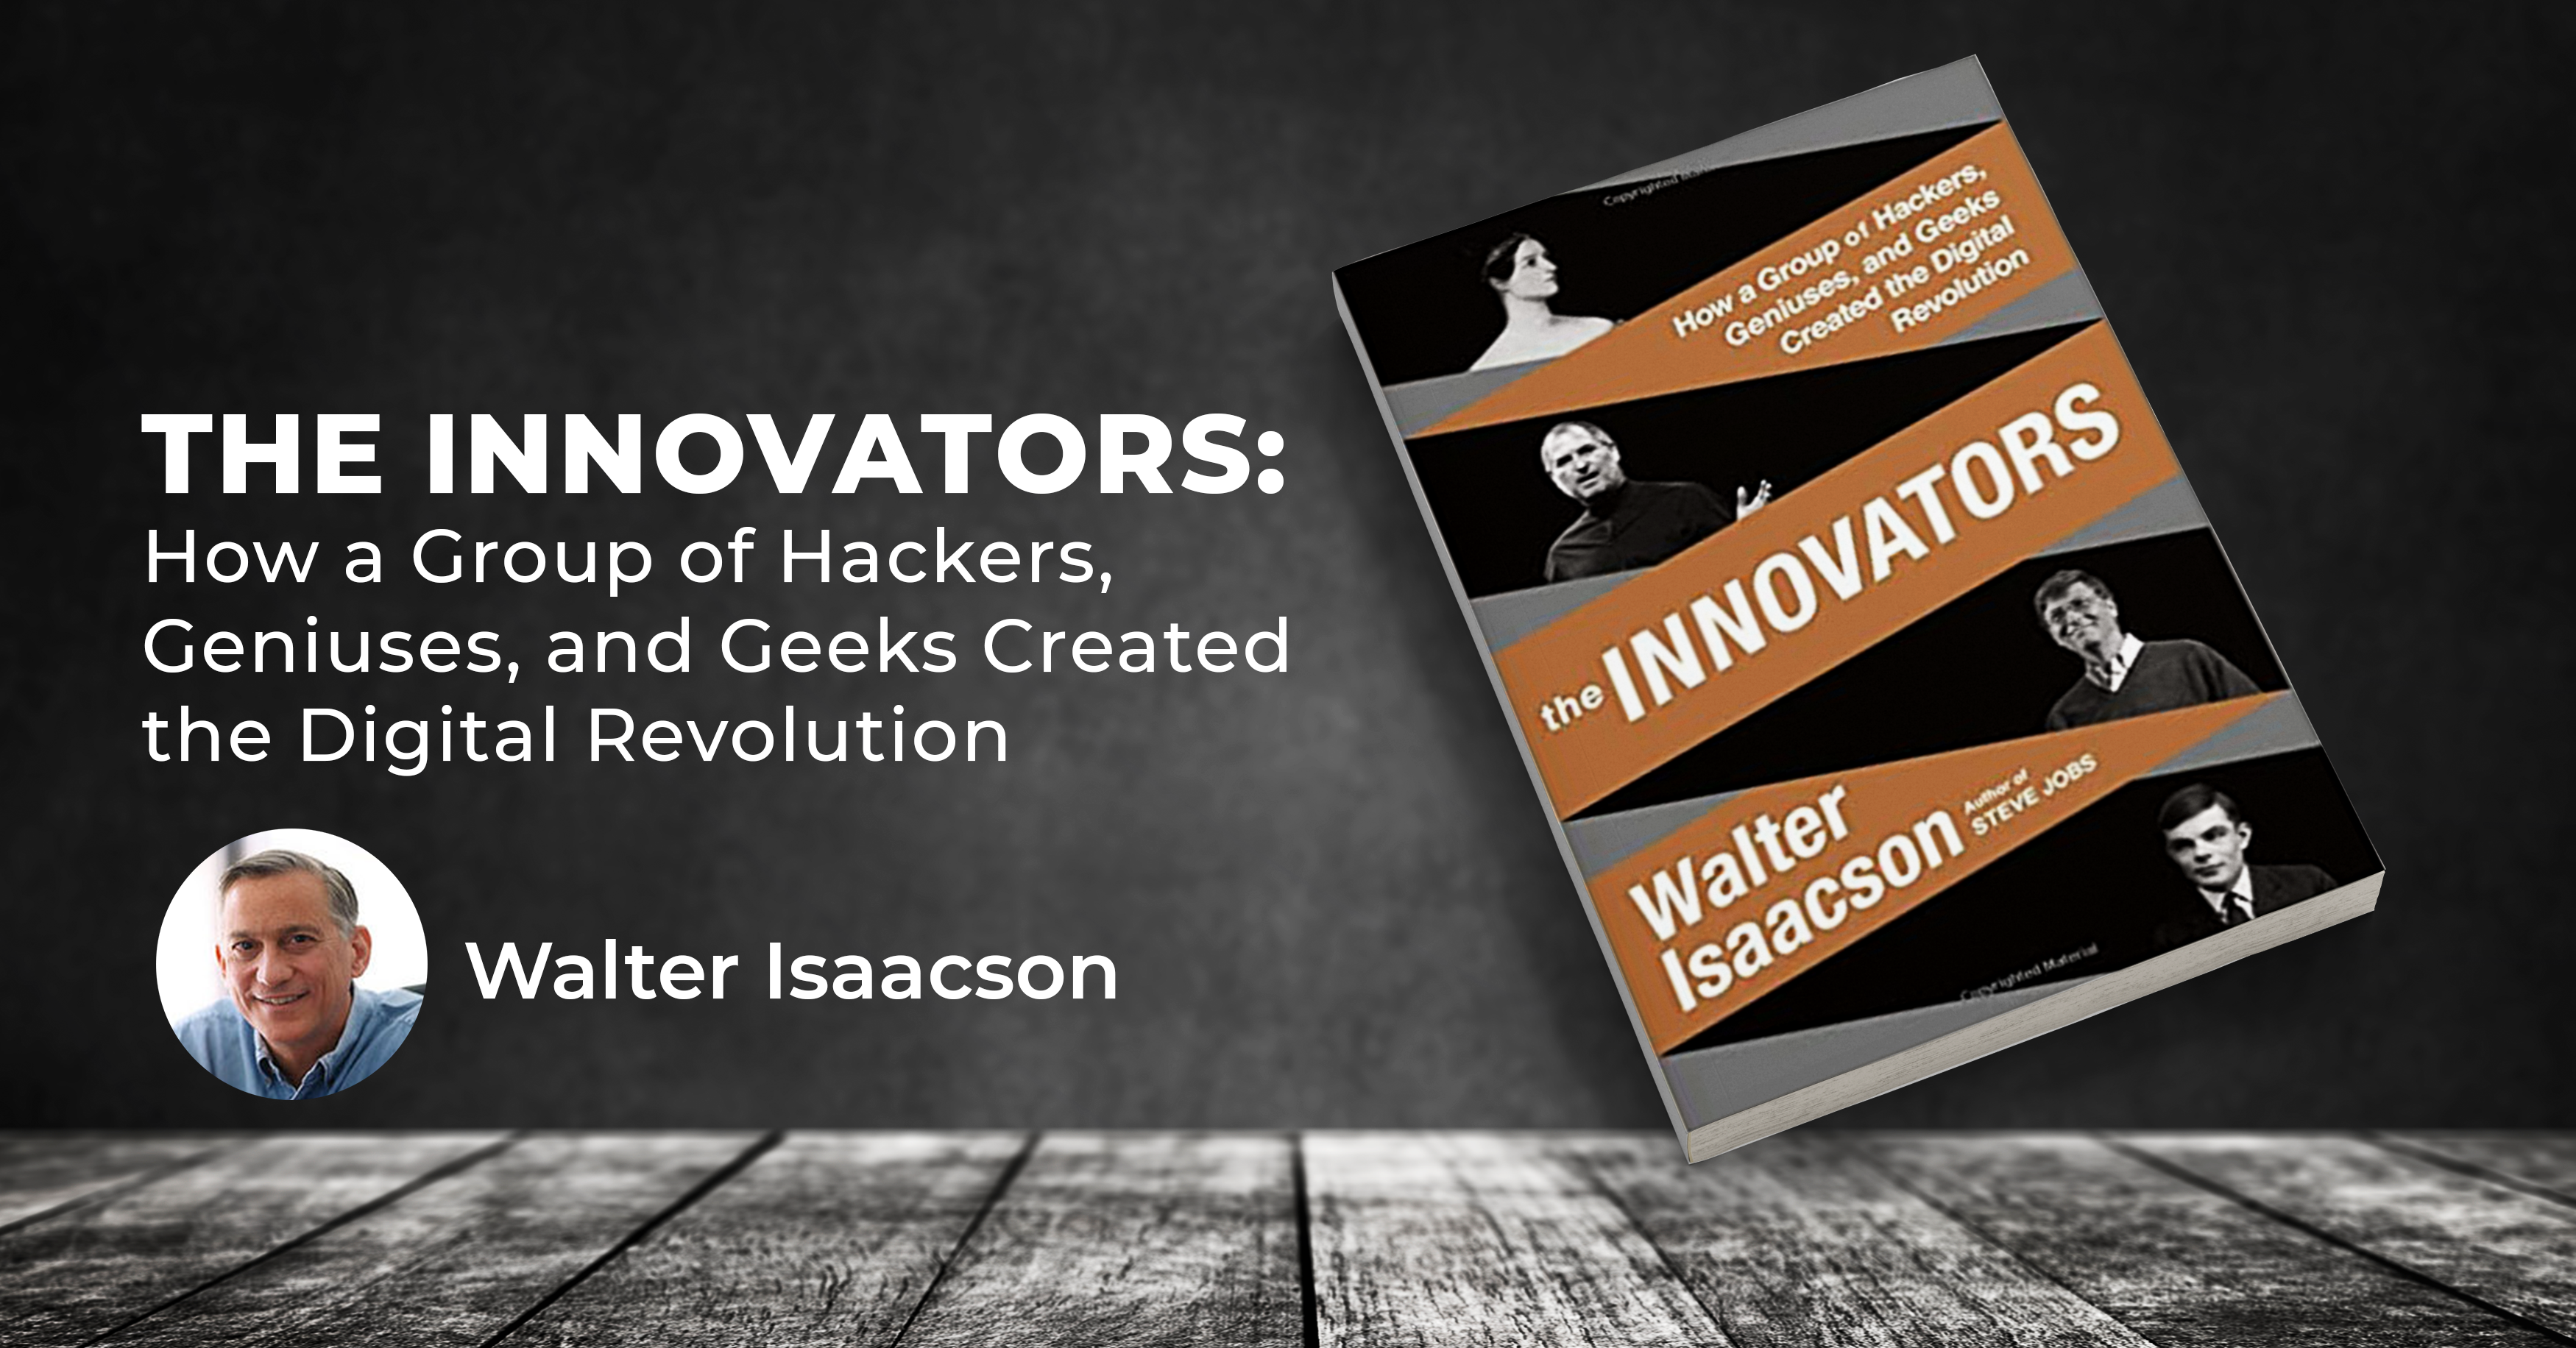 The Innovators by Walter Isaacson